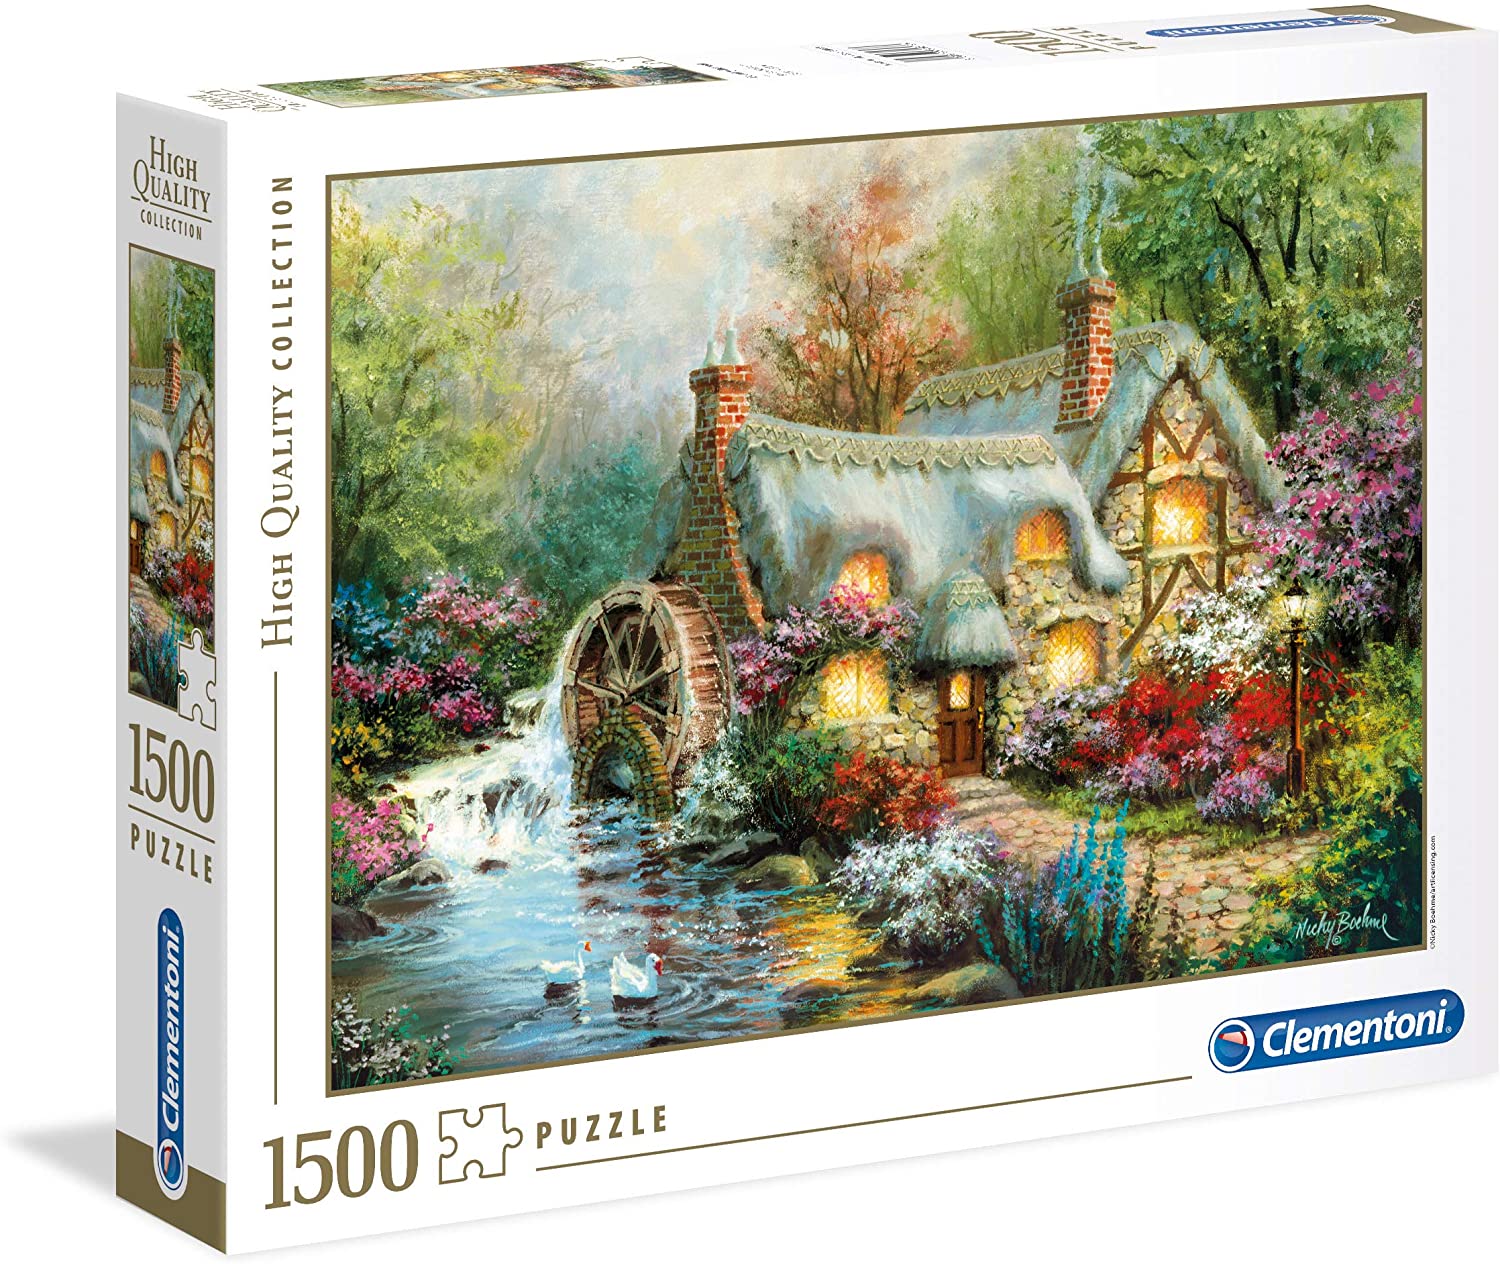 Clementoni 31812" Country Idyll Jigsaw Puzzle 1500 Pieces Collection